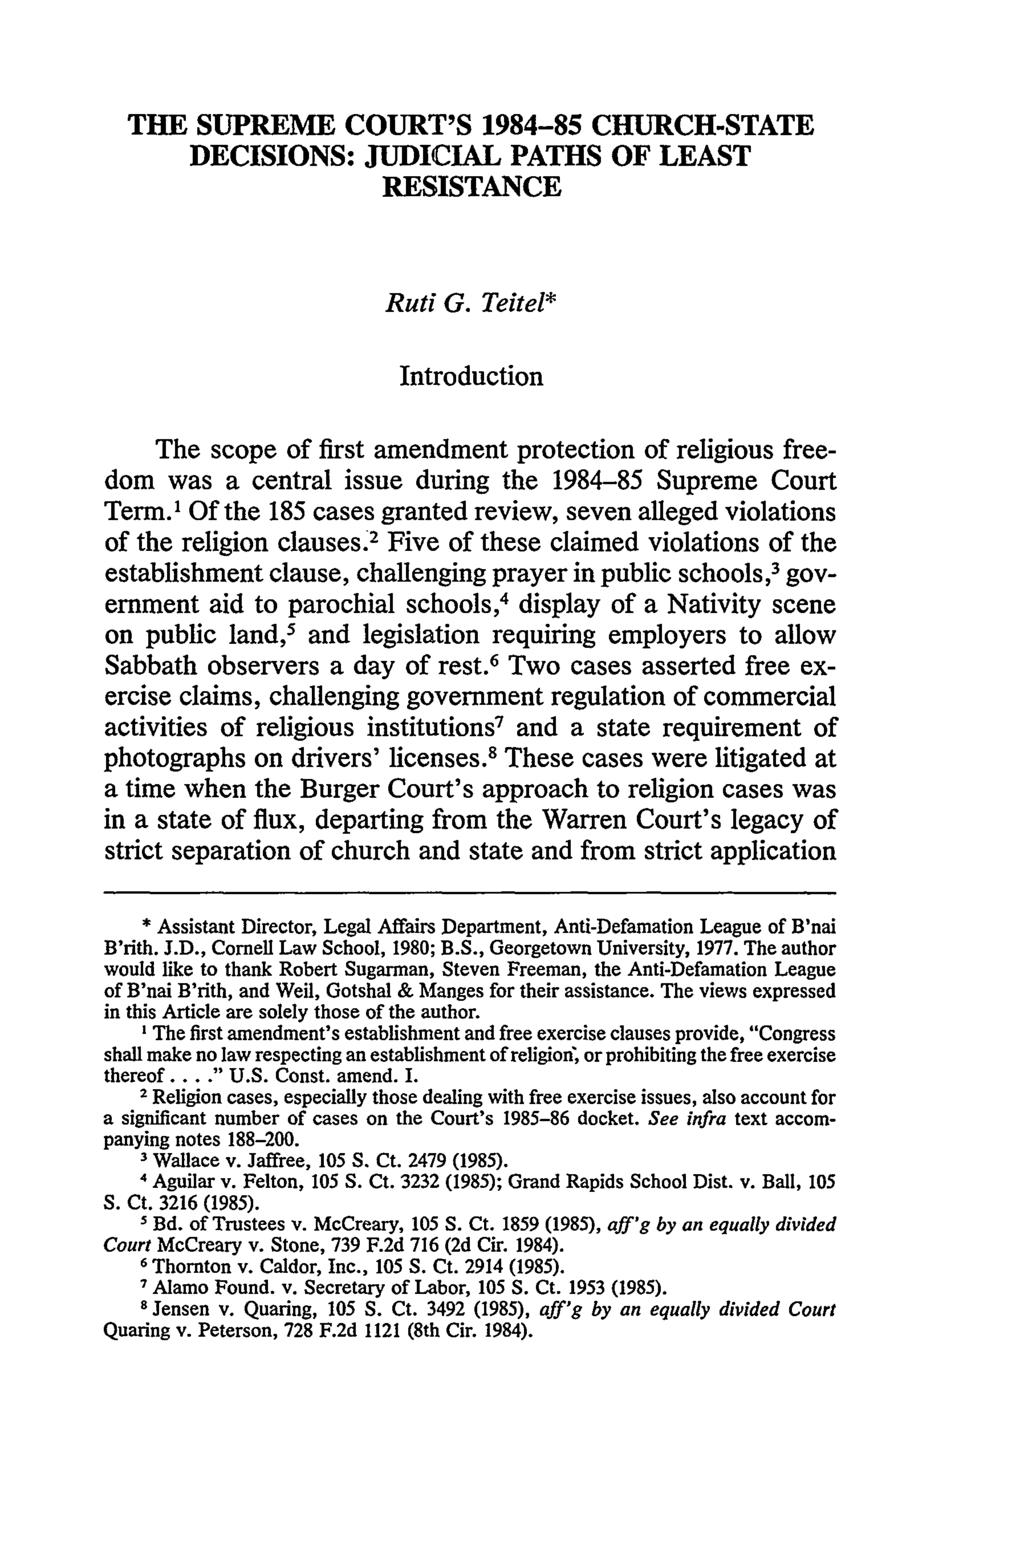 THE SUPREME COURT'S 1984-85 CHURCH-STATE DECISIONS: JUDICIAL PATHS OF LEAST RESISTANCE Ruti G.